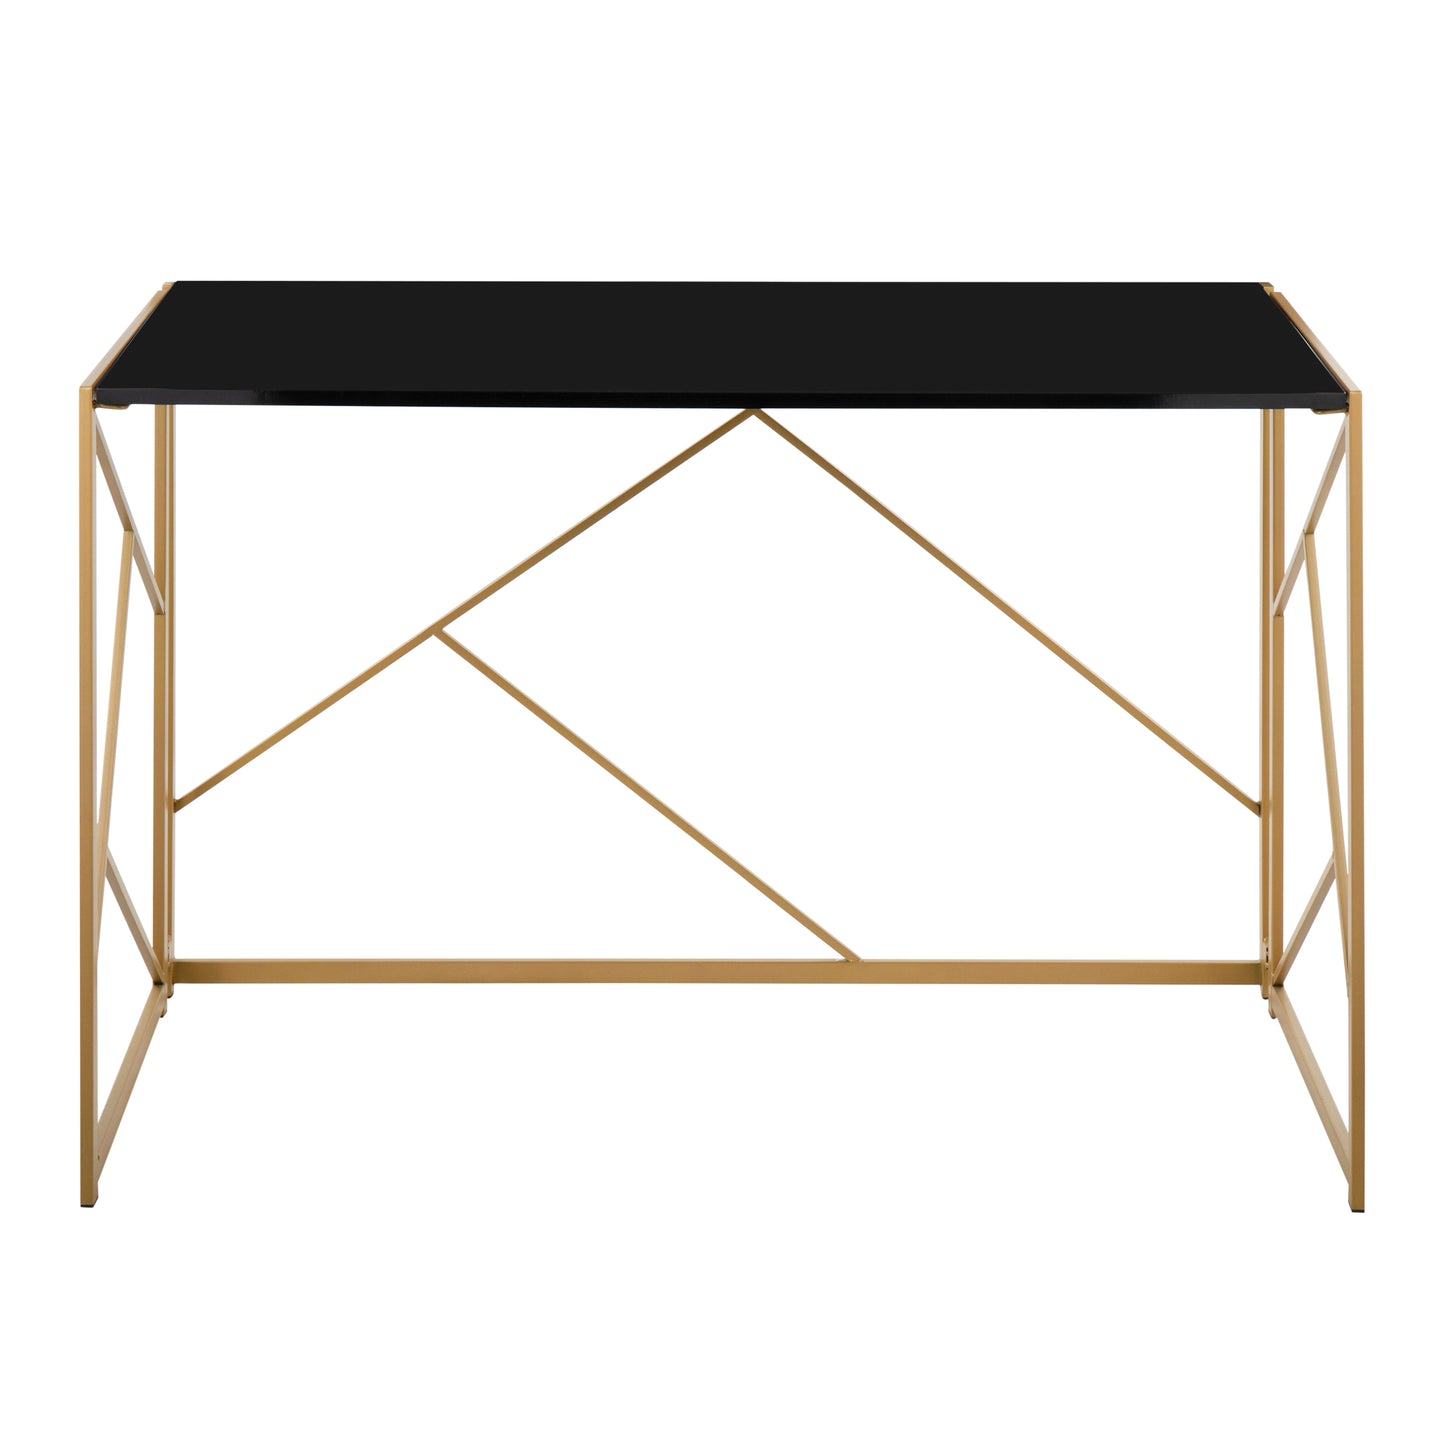 LumiSource Folia Modern Office Desk with Gold Steel and Black Wood